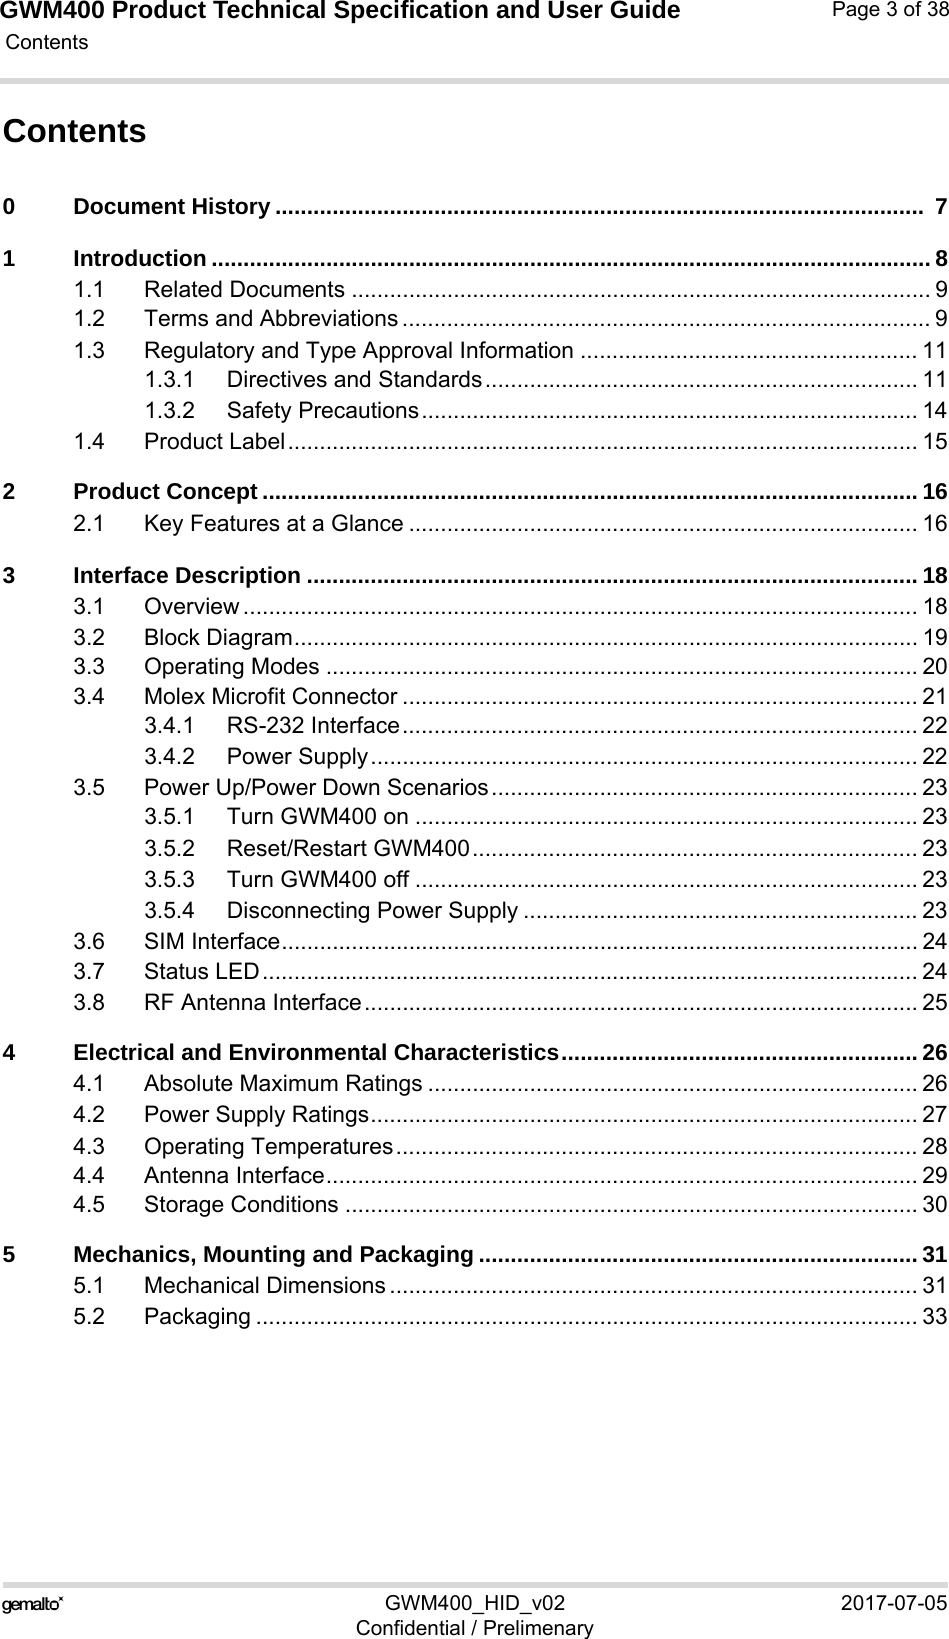 GWM400 Product Technical Specification and User Guide Contents125GWM400_HID_v02 2017-07-05Confidential / PrelimenaryPage 3 of 38Contents0 Document History ......................................................................................................  71 Introduction ................................................................................................................. 81.1 Related Documents ........................................................................................... 91.2 Terms and Abbreviations ................................................................................... 91.3 Regulatory and Type Approval Information ..................................................... 111.3.1 Directives and Standards.................................................................... 111.3.2 Safety Precautions.............................................................................. 141.4 Product Label................................................................................................... 152 Product Concept ....................................................................................................... 162.1 Key Features at a Glance ................................................................................ 163 Interface Description ................................................................................................ 183.1 Overview .......................................................................................................... 183.2 Block Diagram.................................................................................................. 193.3 Operating Modes ............................................................................................. 203.4 Molex Microfit Connector ................................................................................. 213.4.1 RS-232 Interface................................................................................. 223.4.2 Power Supply...................................................................................... 223.5 Power Up/Power Down Scenarios................................................................... 233.5.1 Turn GWM400 on ............................................................................... 233.5.2 Reset/Restart GWM400...................................................................... 233.5.3 Turn GWM400 off ............................................................................... 233.5.4 Disconnecting Power Supply .............................................................. 233.6 SIM Interface.................................................................................................... 243.7 Status LED....................................................................................................... 243.8 RF Antenna Interface....................................................................................... 254 Electrical and Environmental Characteristics........................................................ 264.1 Absolute Maximum Ratings ............................................................................. 264.2 Power Supply Ratings...................................................................................... 274.3 Operating Temperatures.................................................................................. 284.4 Antenna Interface............................................................................................. 294.5 Storage Conditions .......................................................................................... 305 Mechanics, Mounting and Packaging ..................................................................... 315.1 Mechanical Dimensions ................................................................................... 315.2 Packaging ........................................................................................................ 33